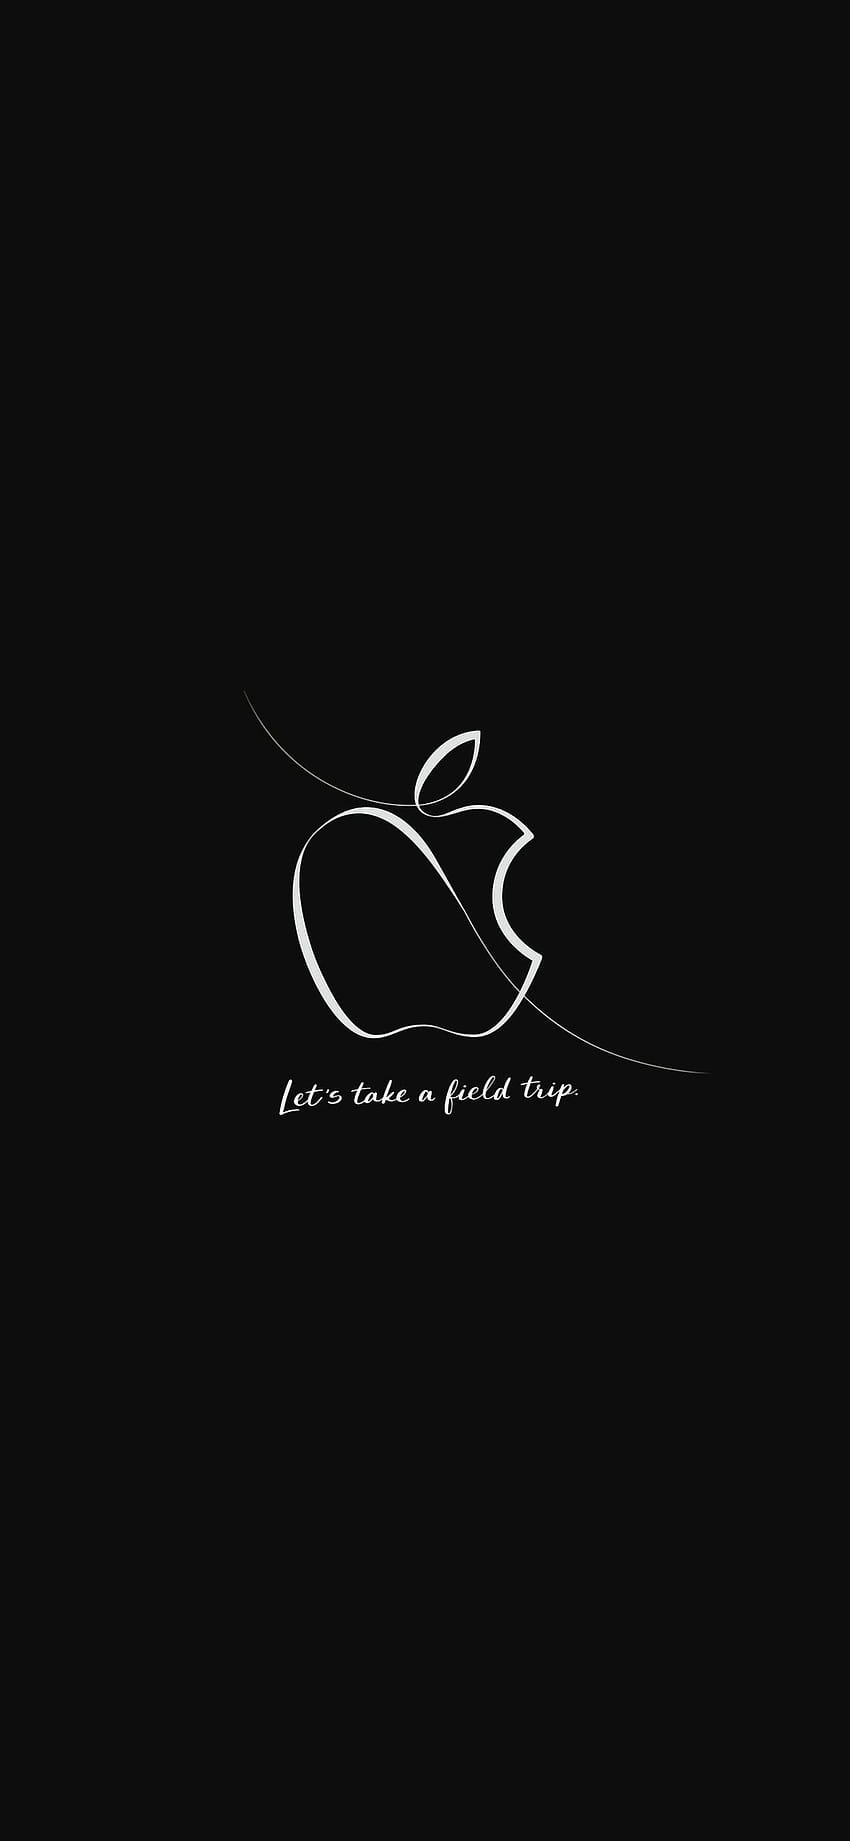 Apple 'Let's take a field trip' media event, iphone black apple HD ...